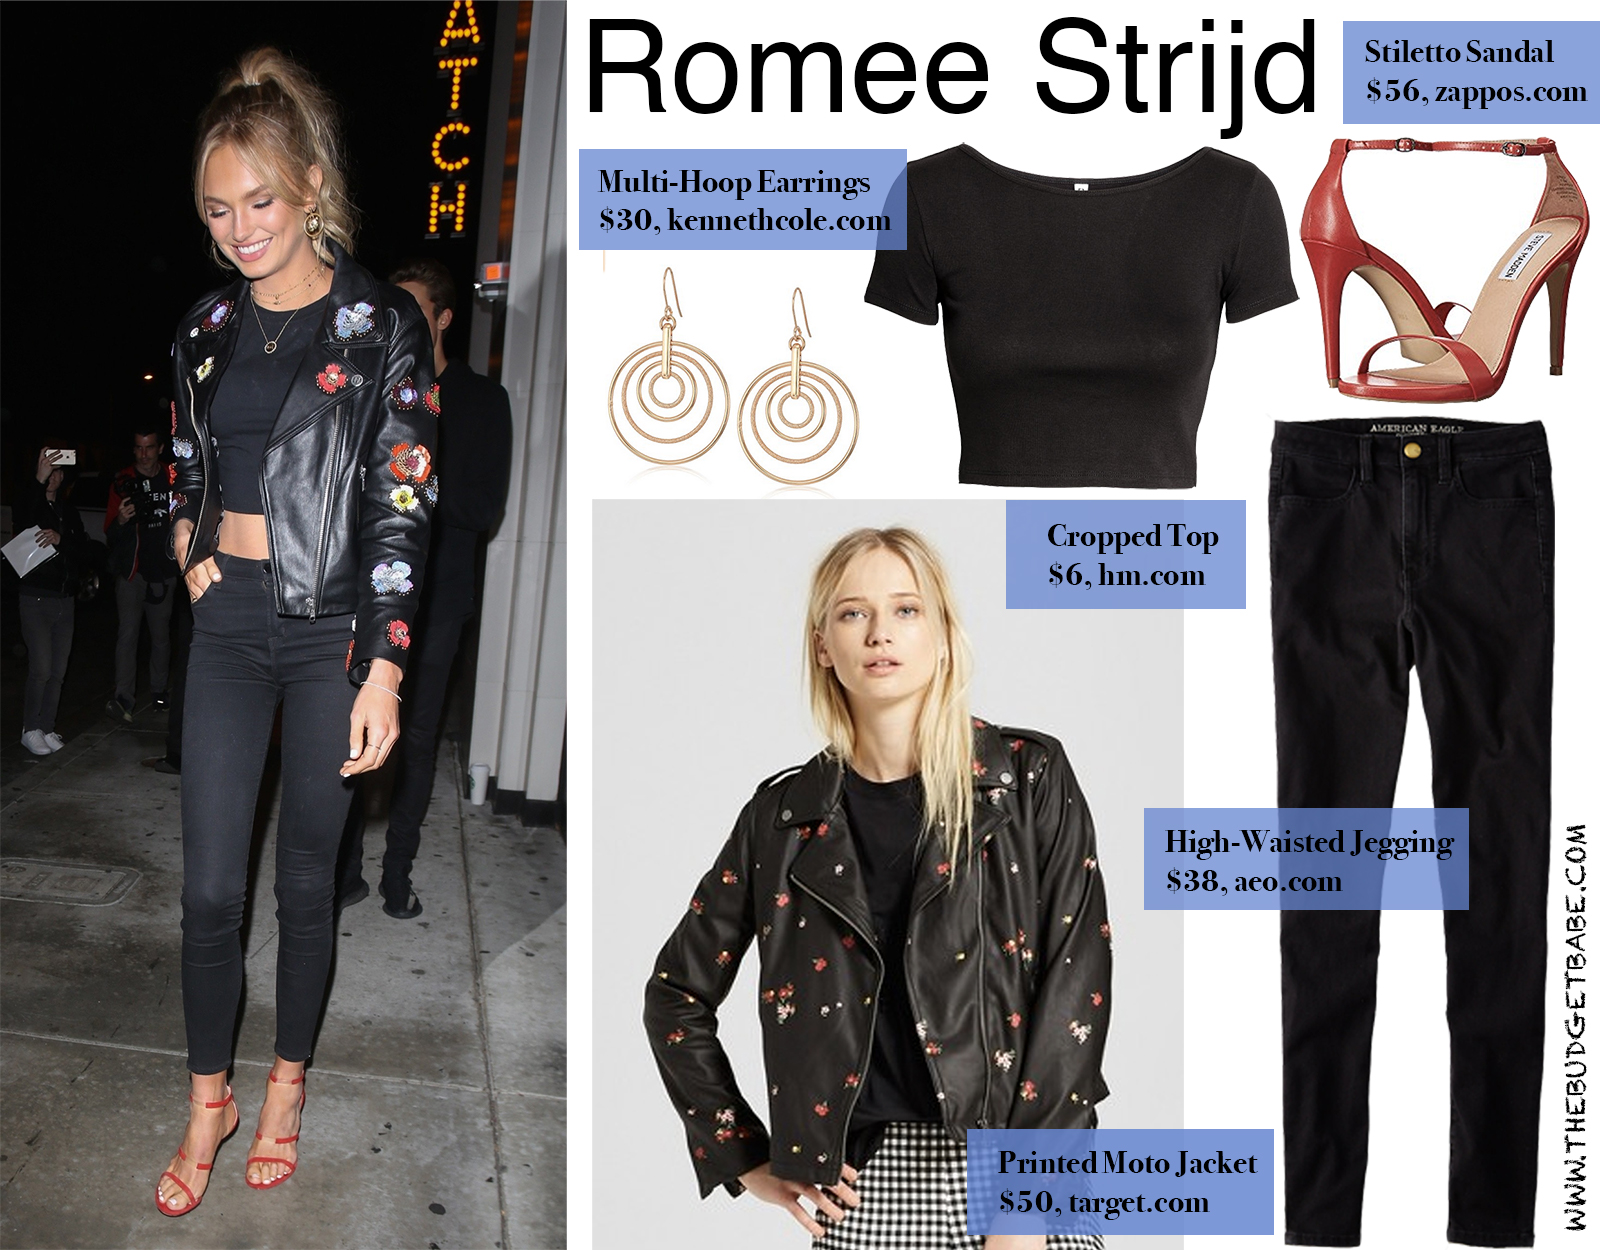 Romee Strijd Floral Moto Jacket and Bright Stiletto Sandals For Less